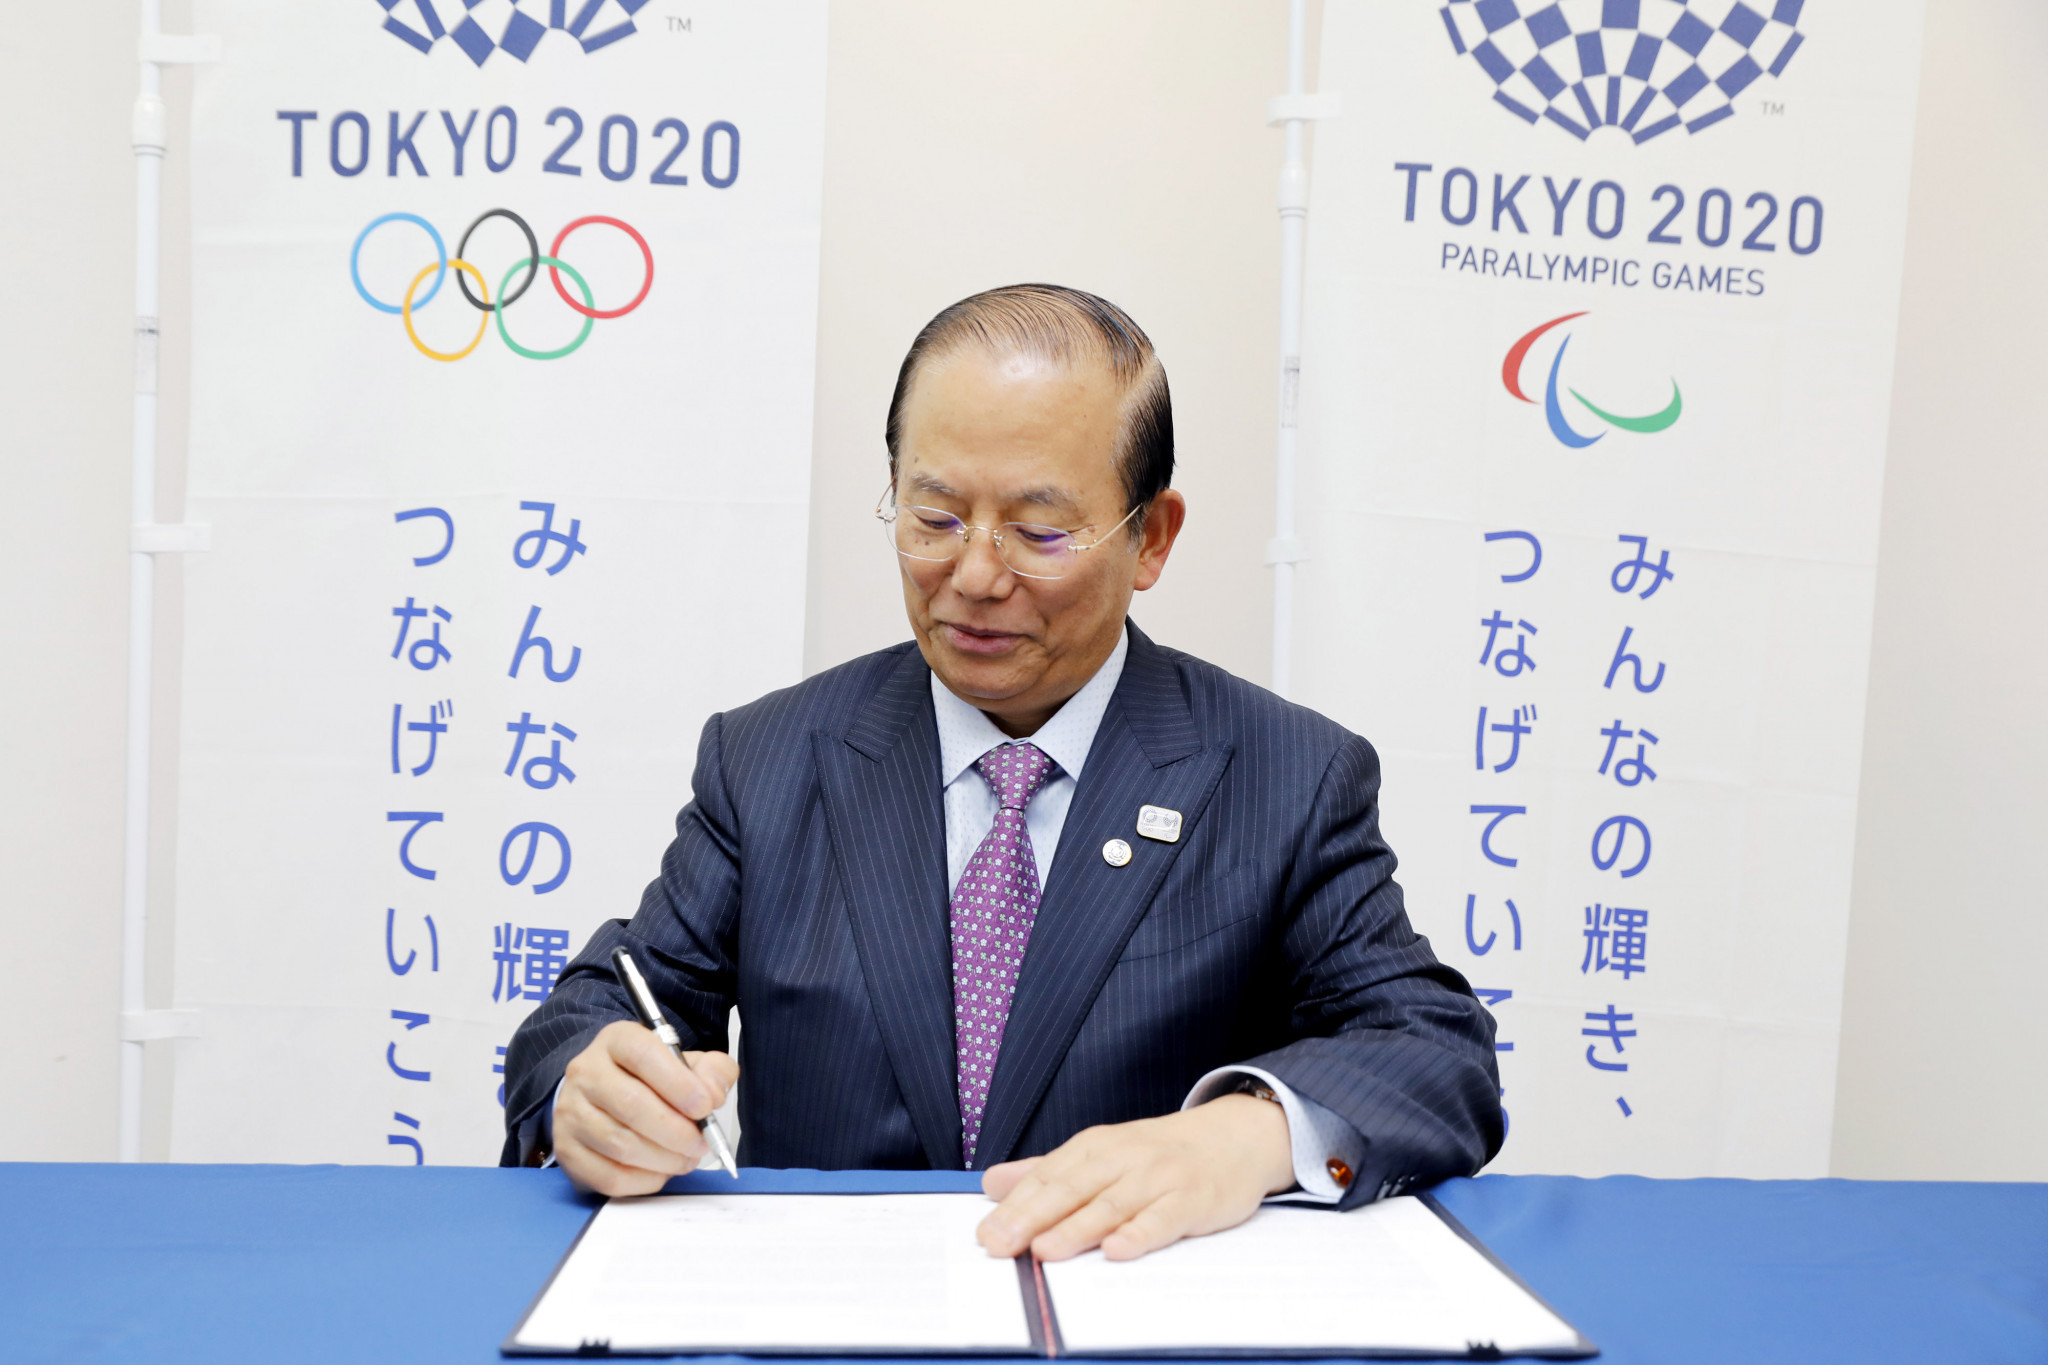 Tokyo 2020 chief executive Toshirō Mutō welcomed the finalised agreement ©Tokyo 2020